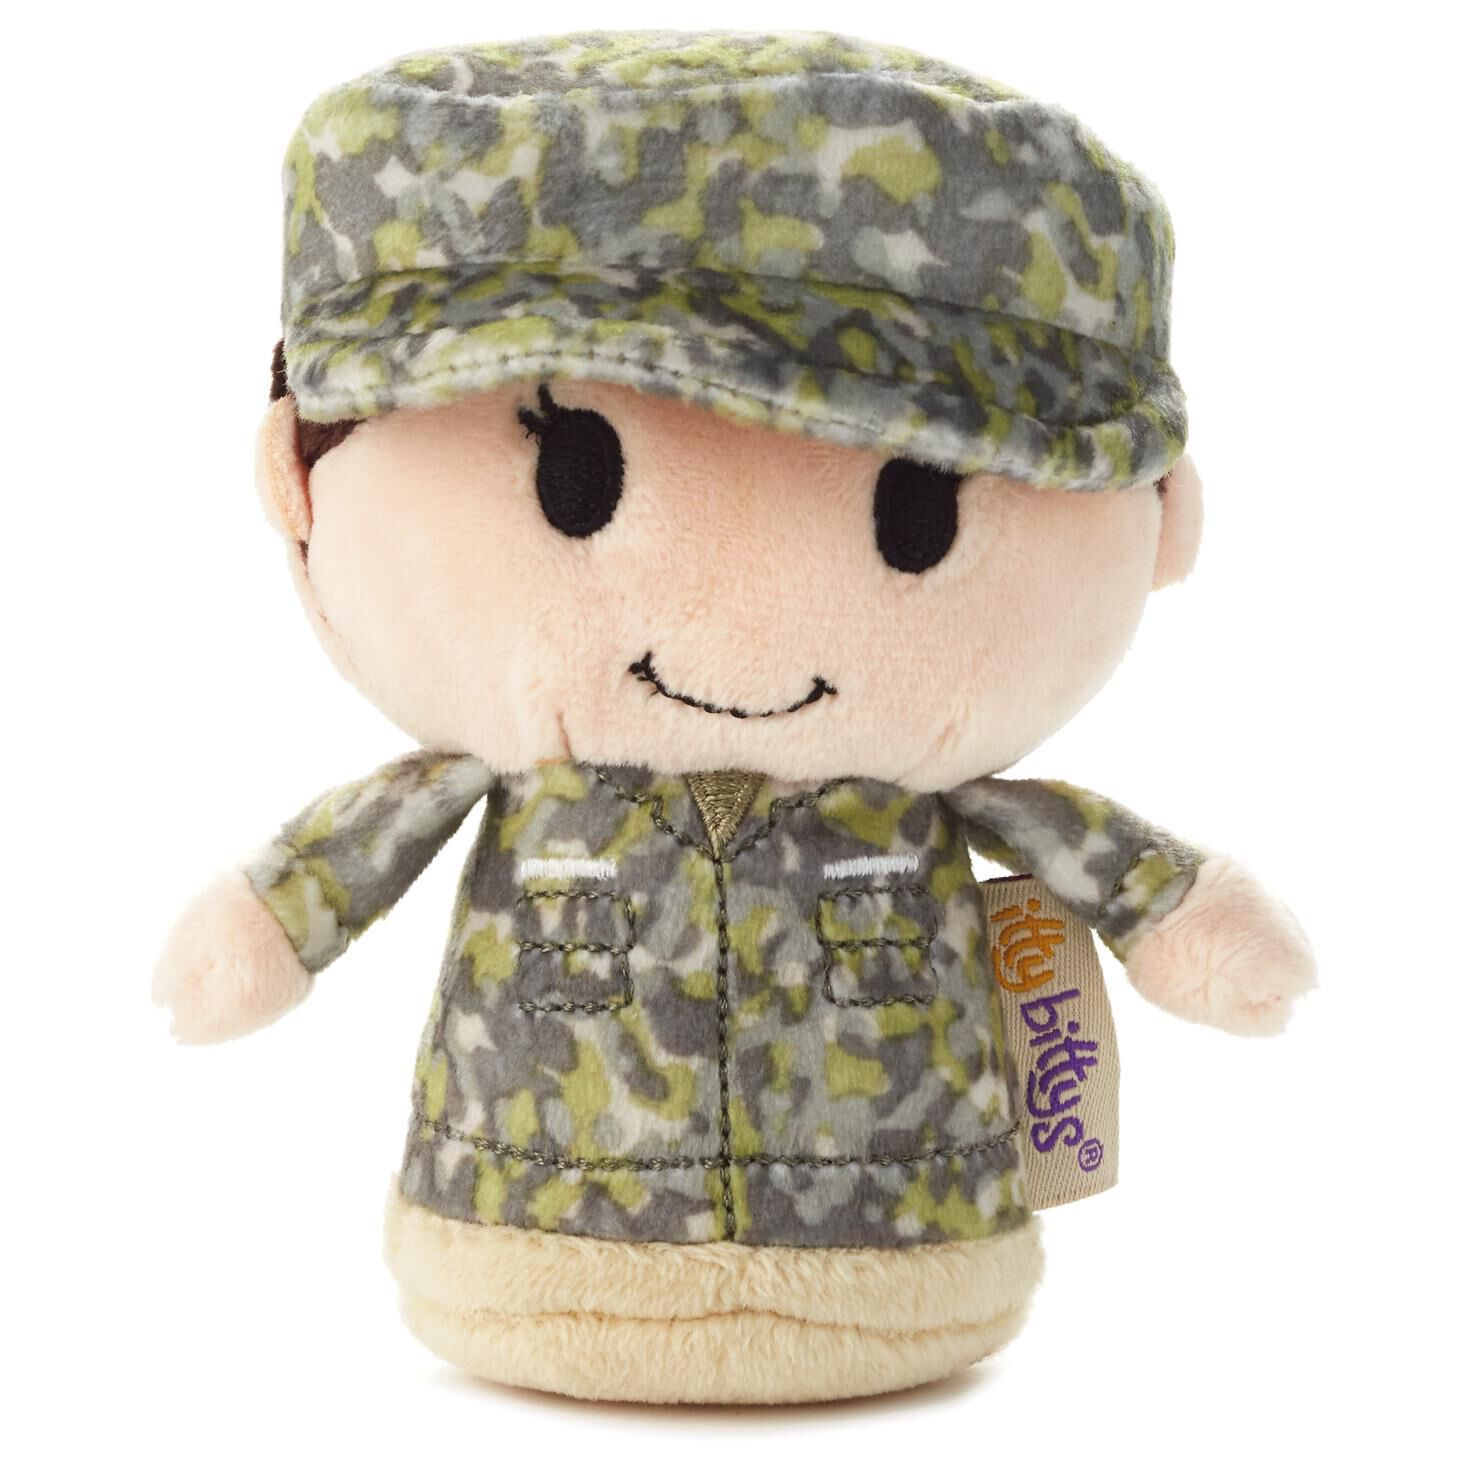 Marines FEMALE Itty Bitty with Glasses Camo Itty Bitty Air Force Army Navy Military Itty Bitty Itty Bitty Soldier with glasses